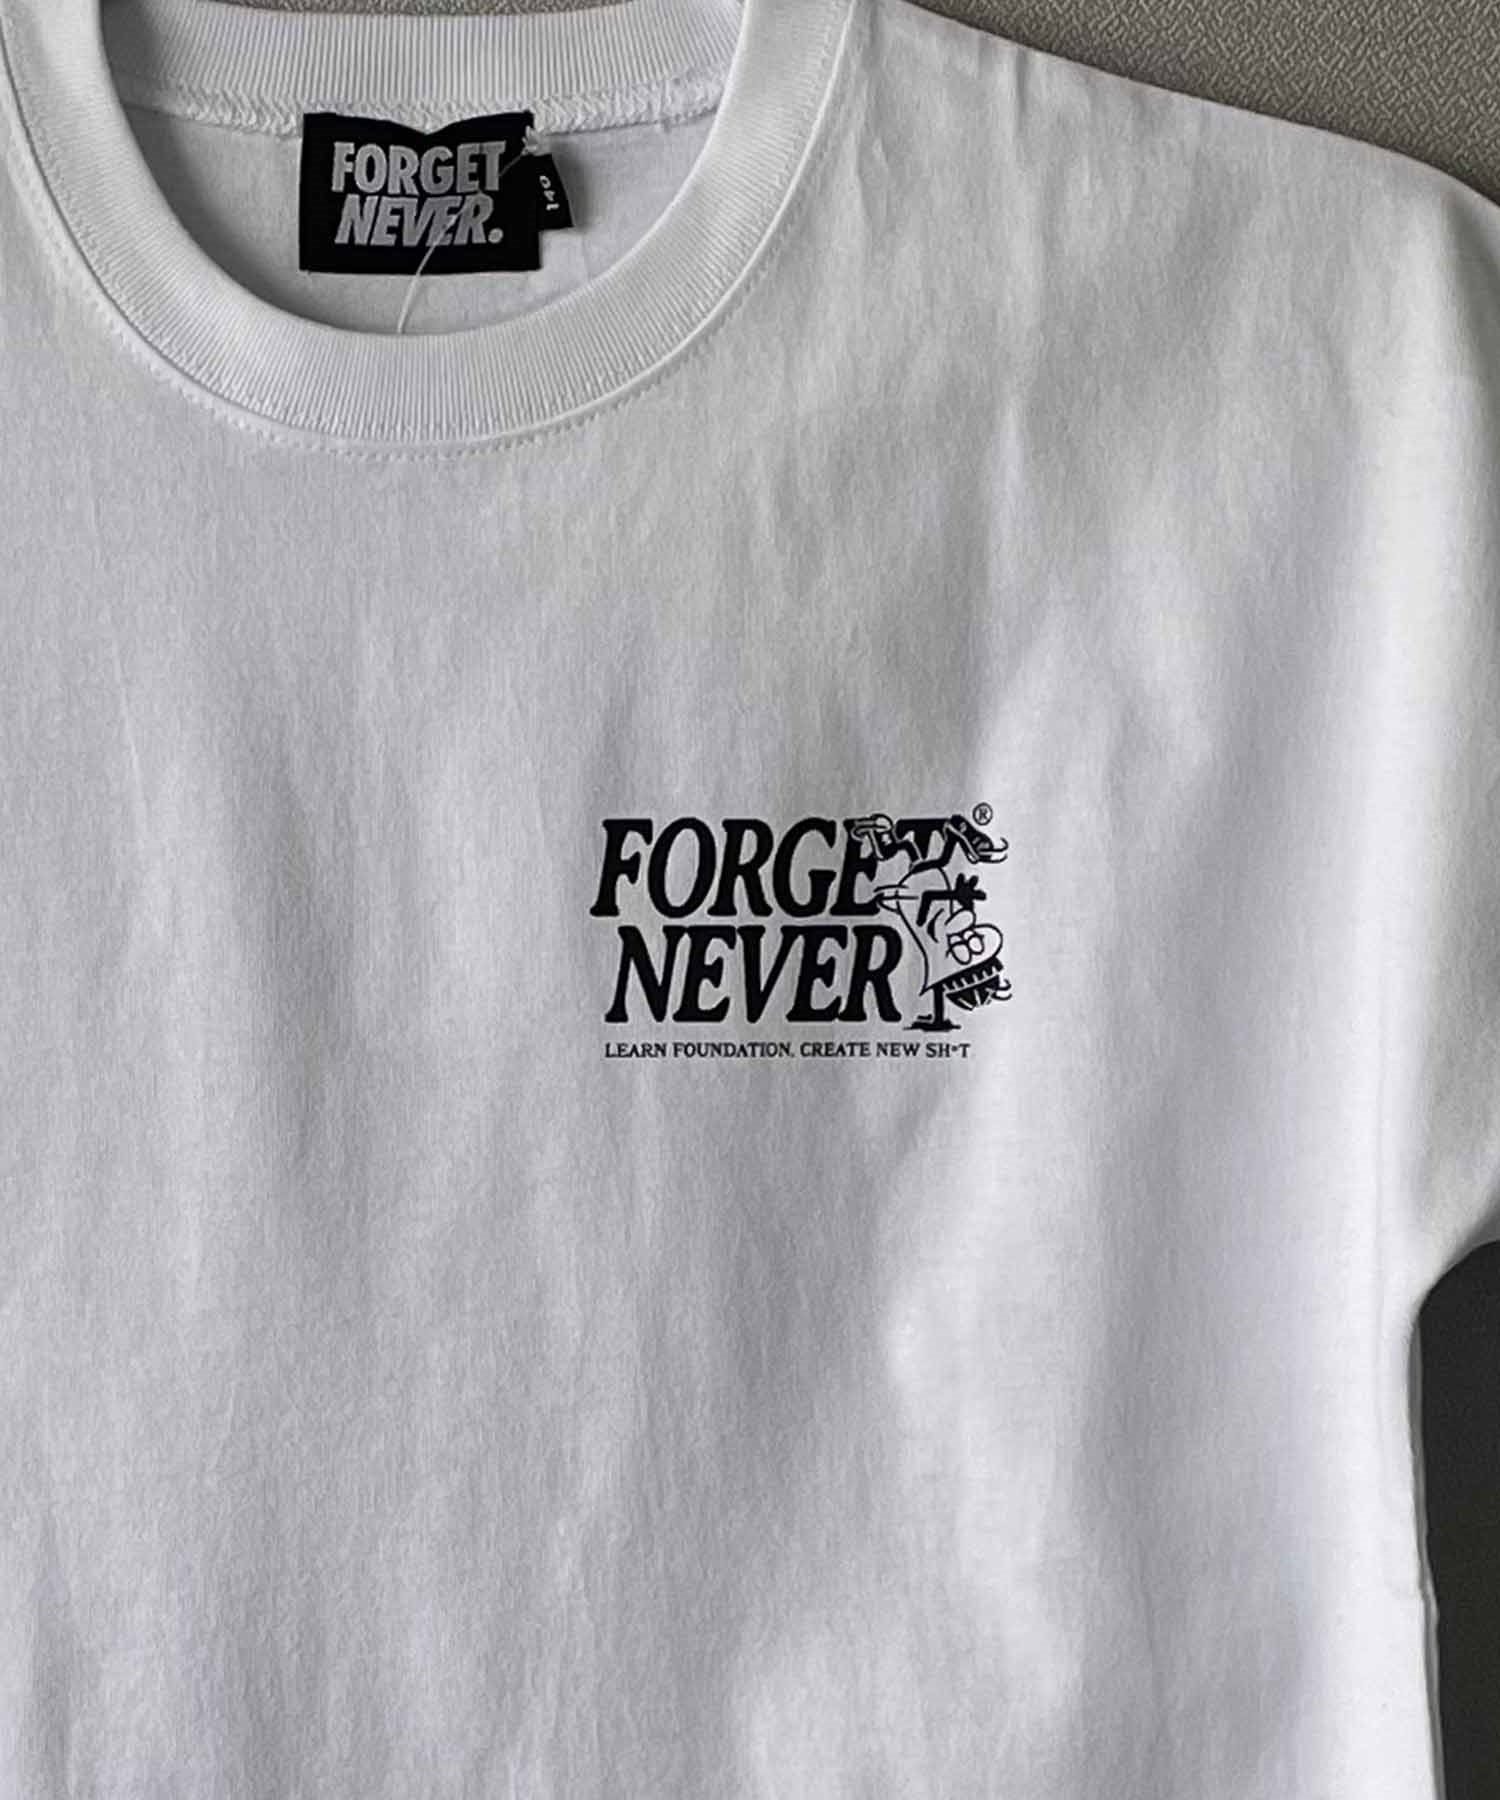 FORGET NEVER フォーゲットネバー キッズ 半袖 Tシャツ バックプリント ムラサキスポーツ限定 242OO3ST209FN(BLK-130cm)